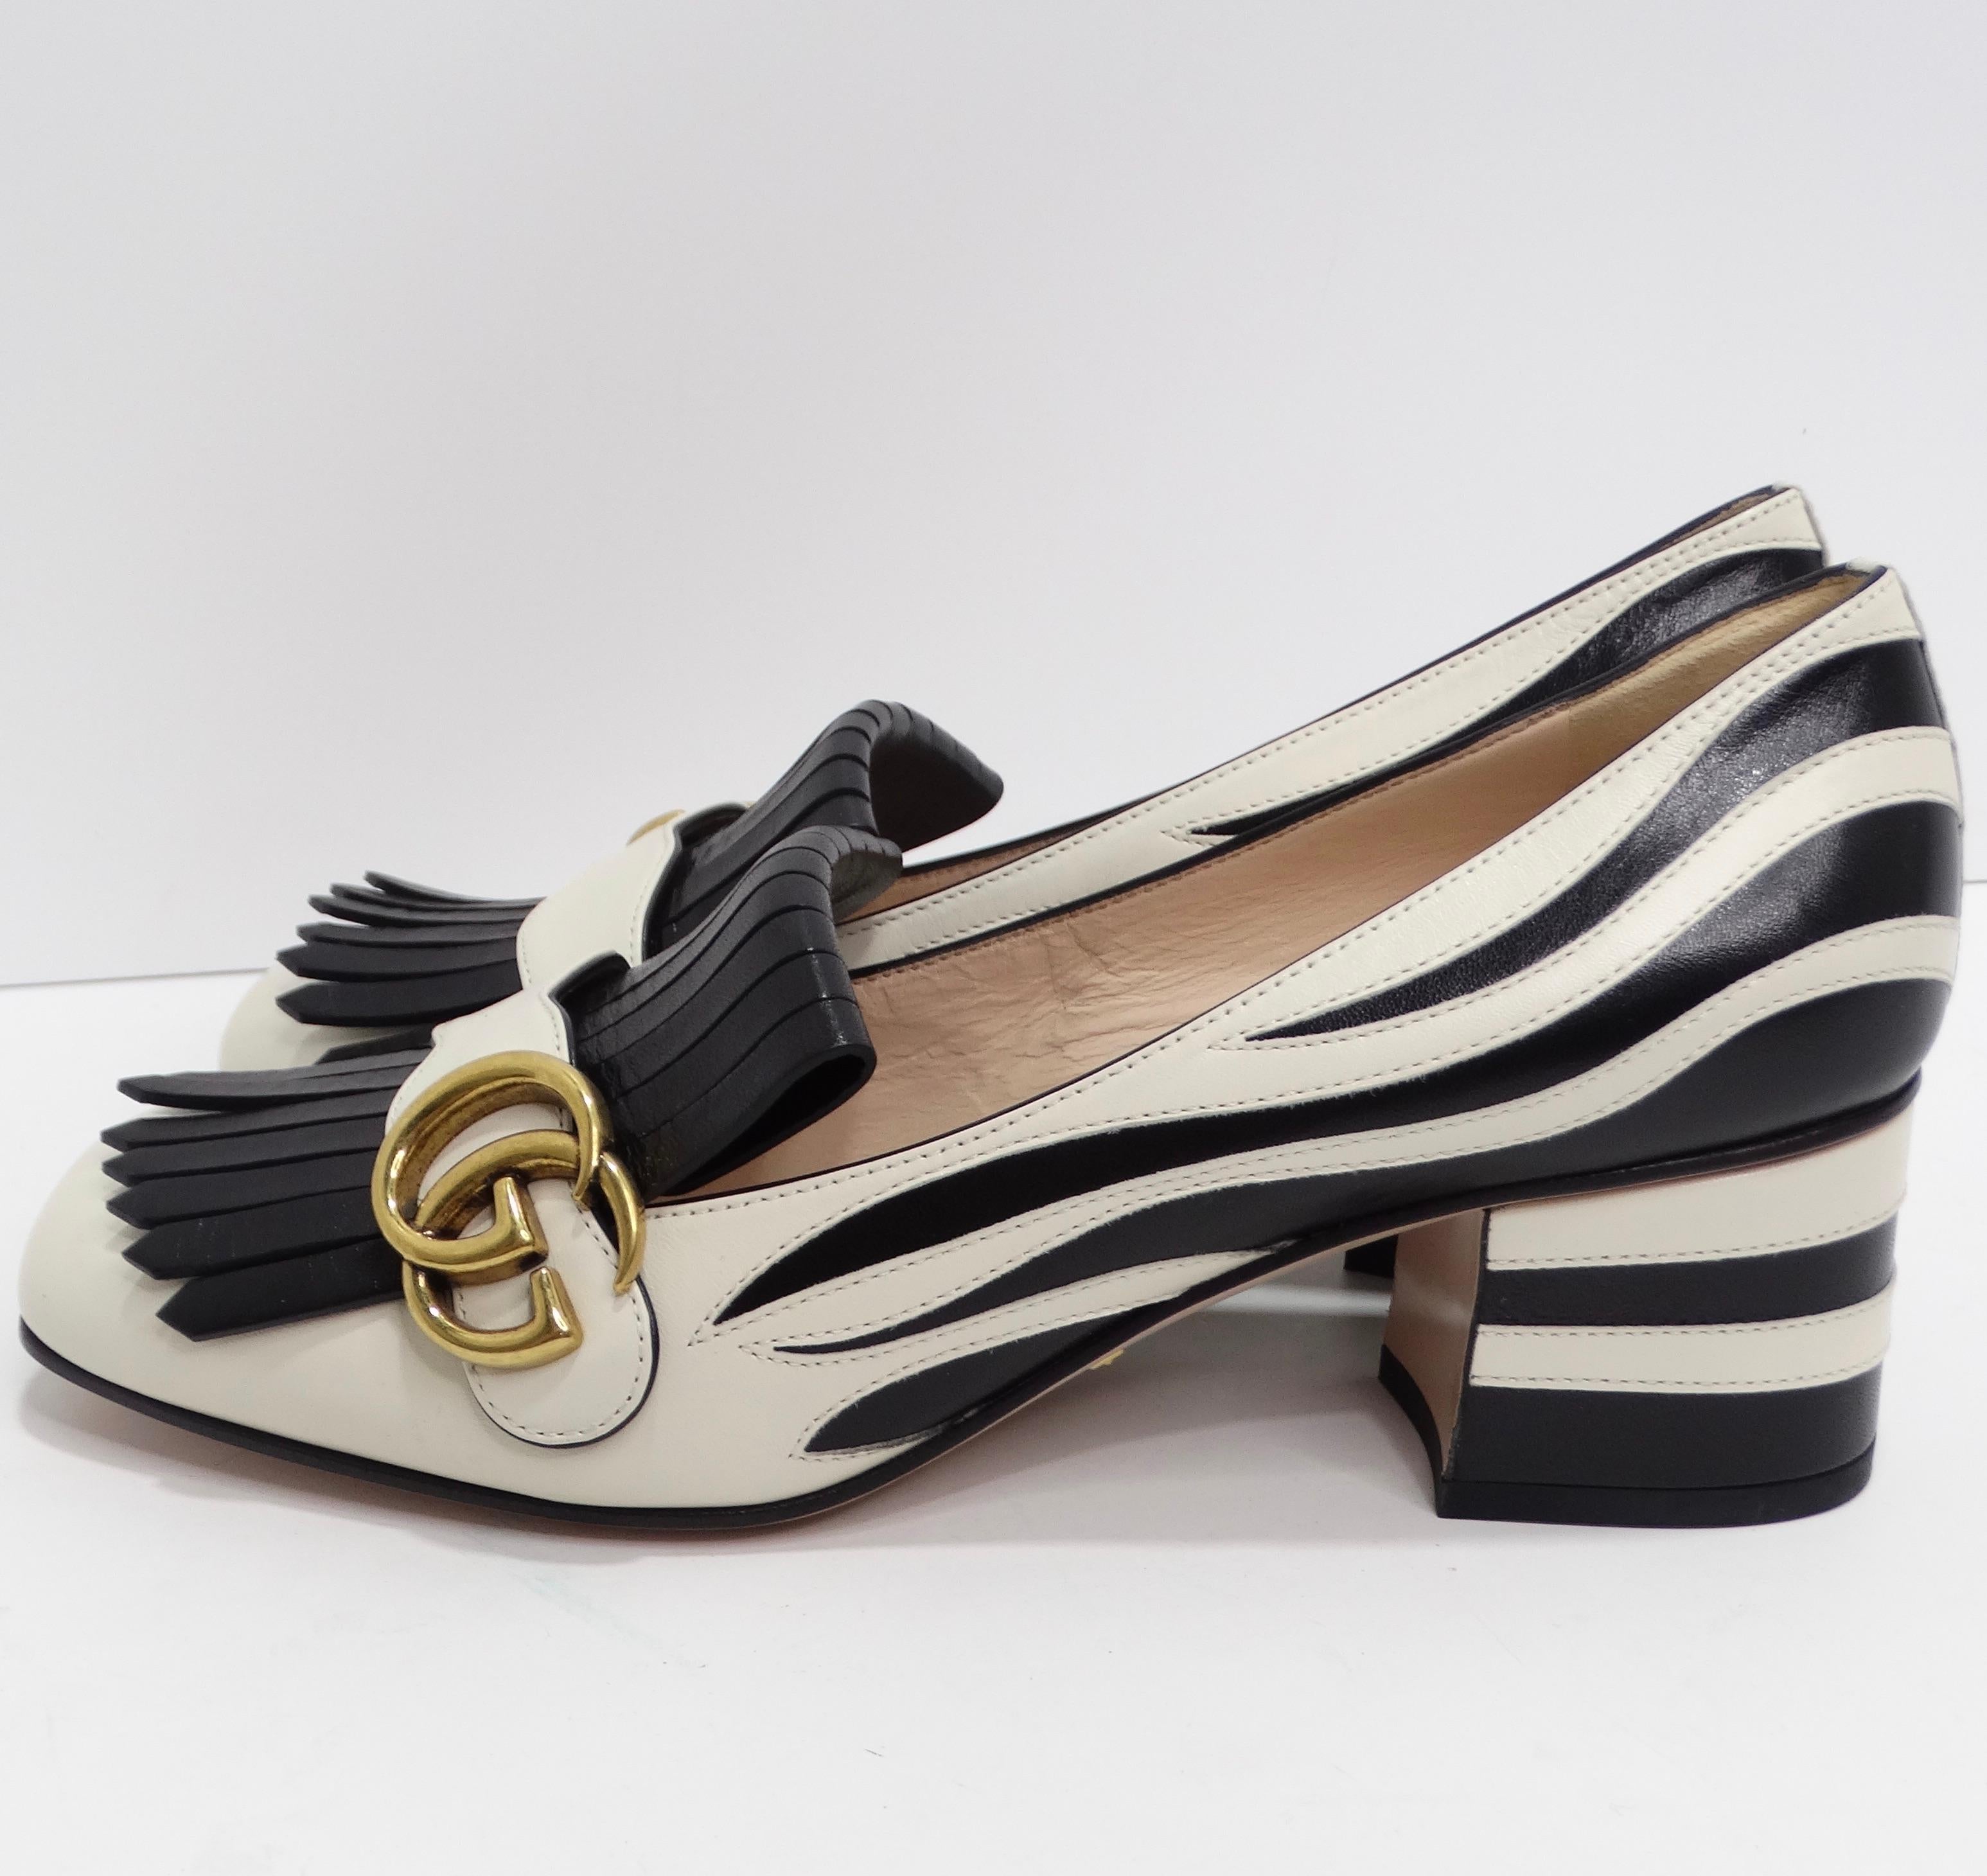 Gucci Marmont Fringe Leather 55mm Loafer For Sale 5